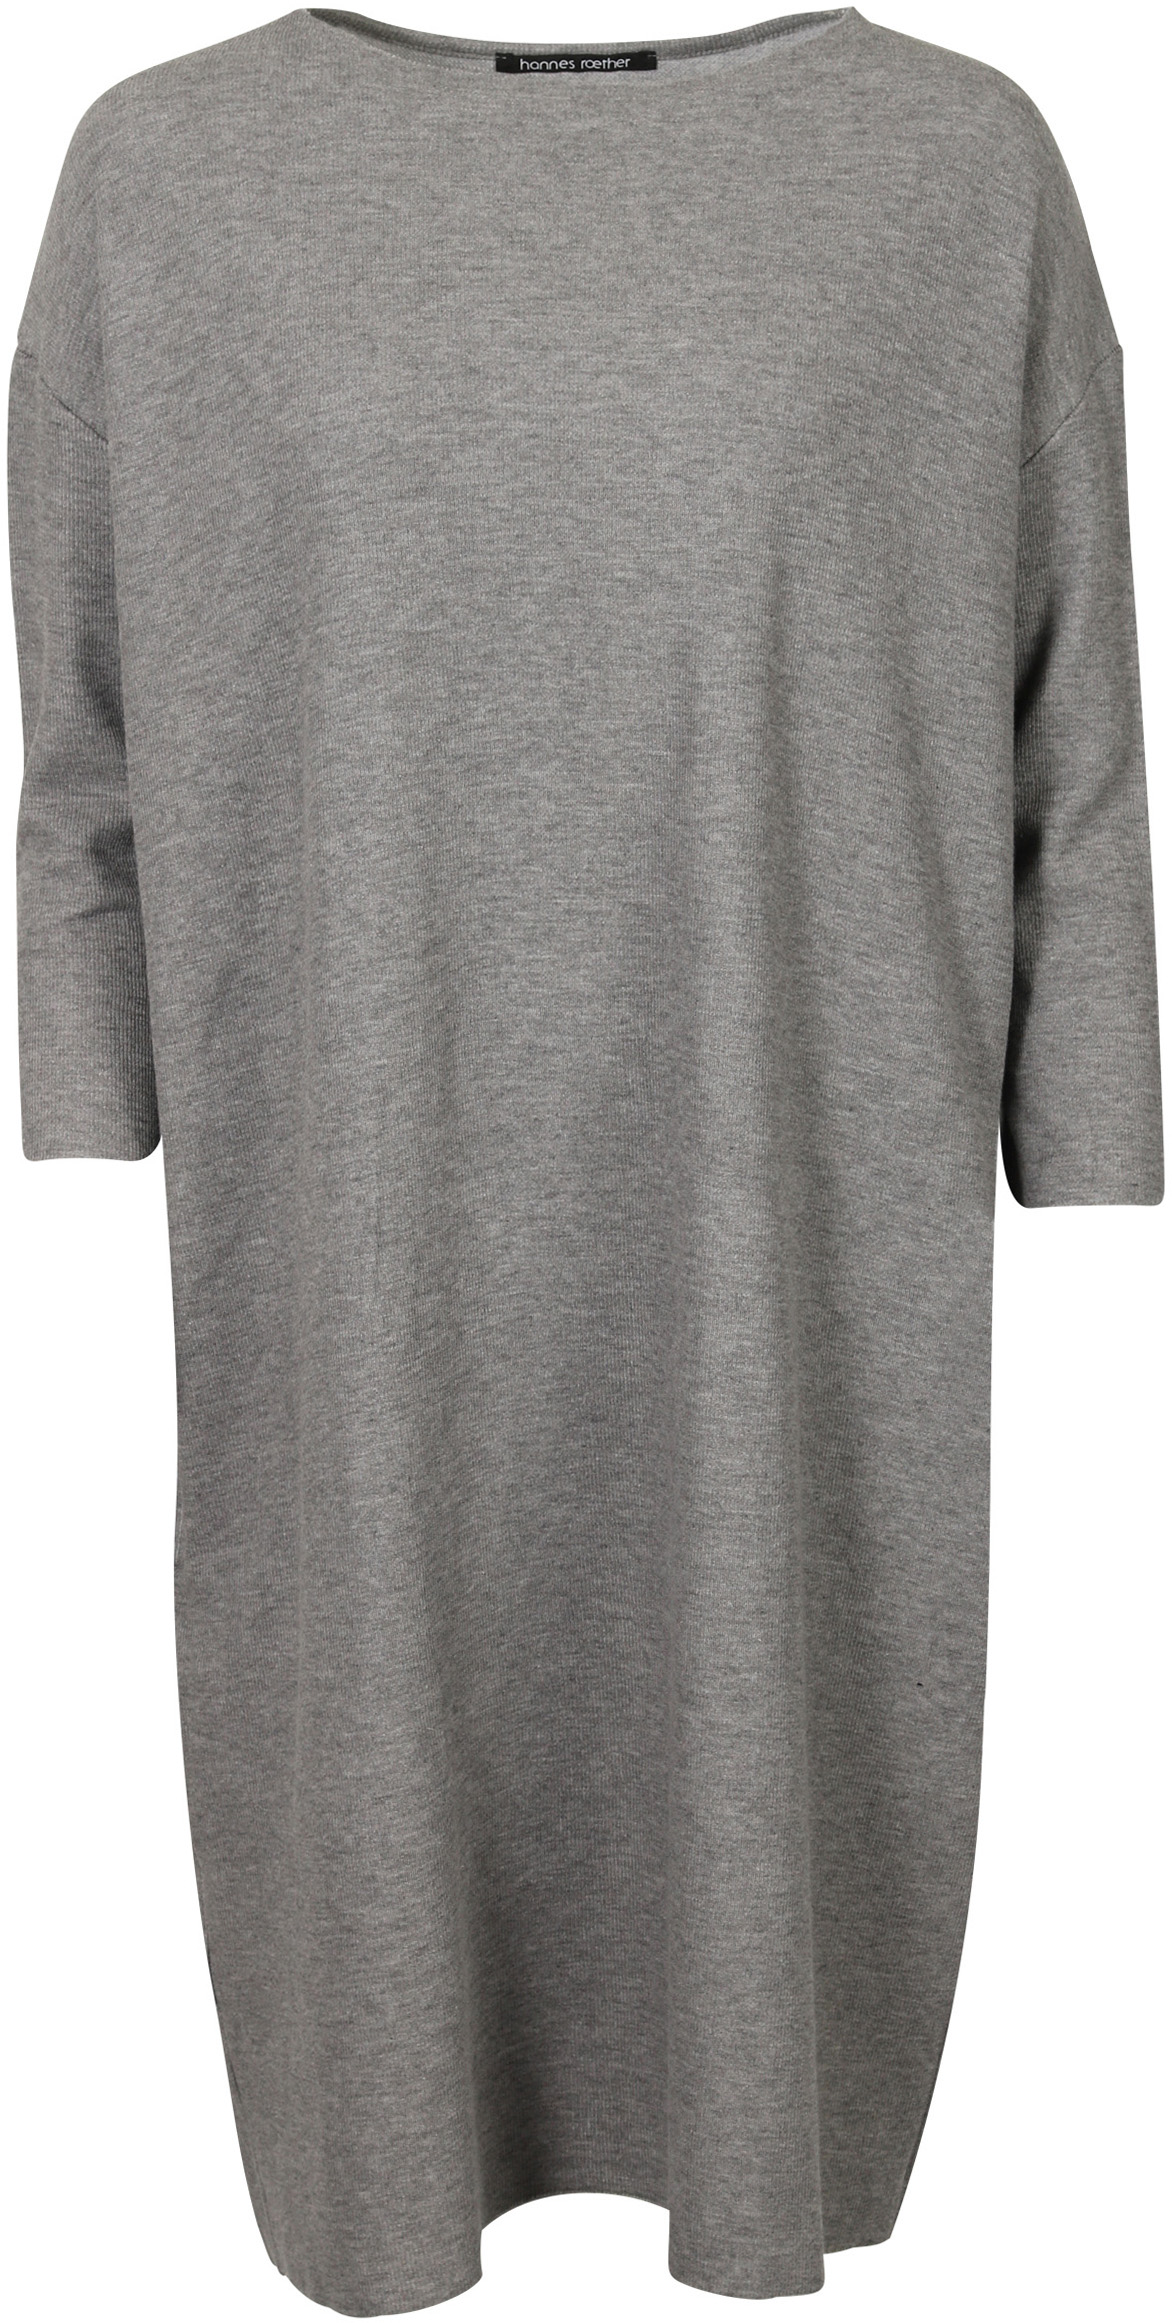 Hannes Roether Cotton Dress Mid Grey XL